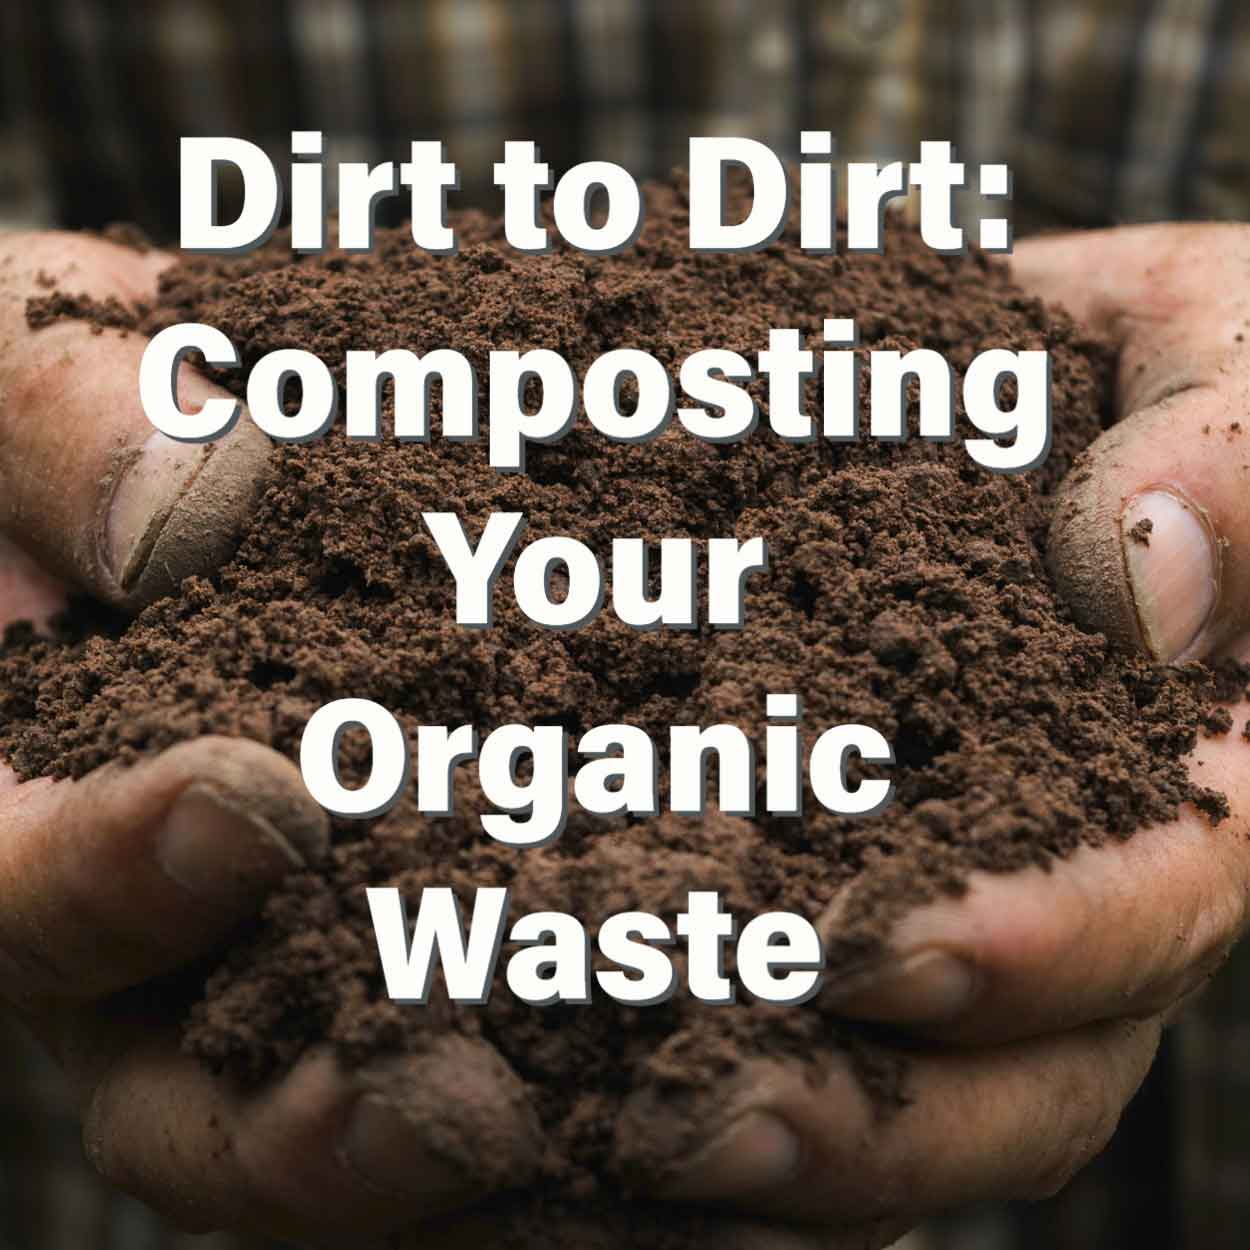 Dirt to Dirt: Composting Your Organic Waste